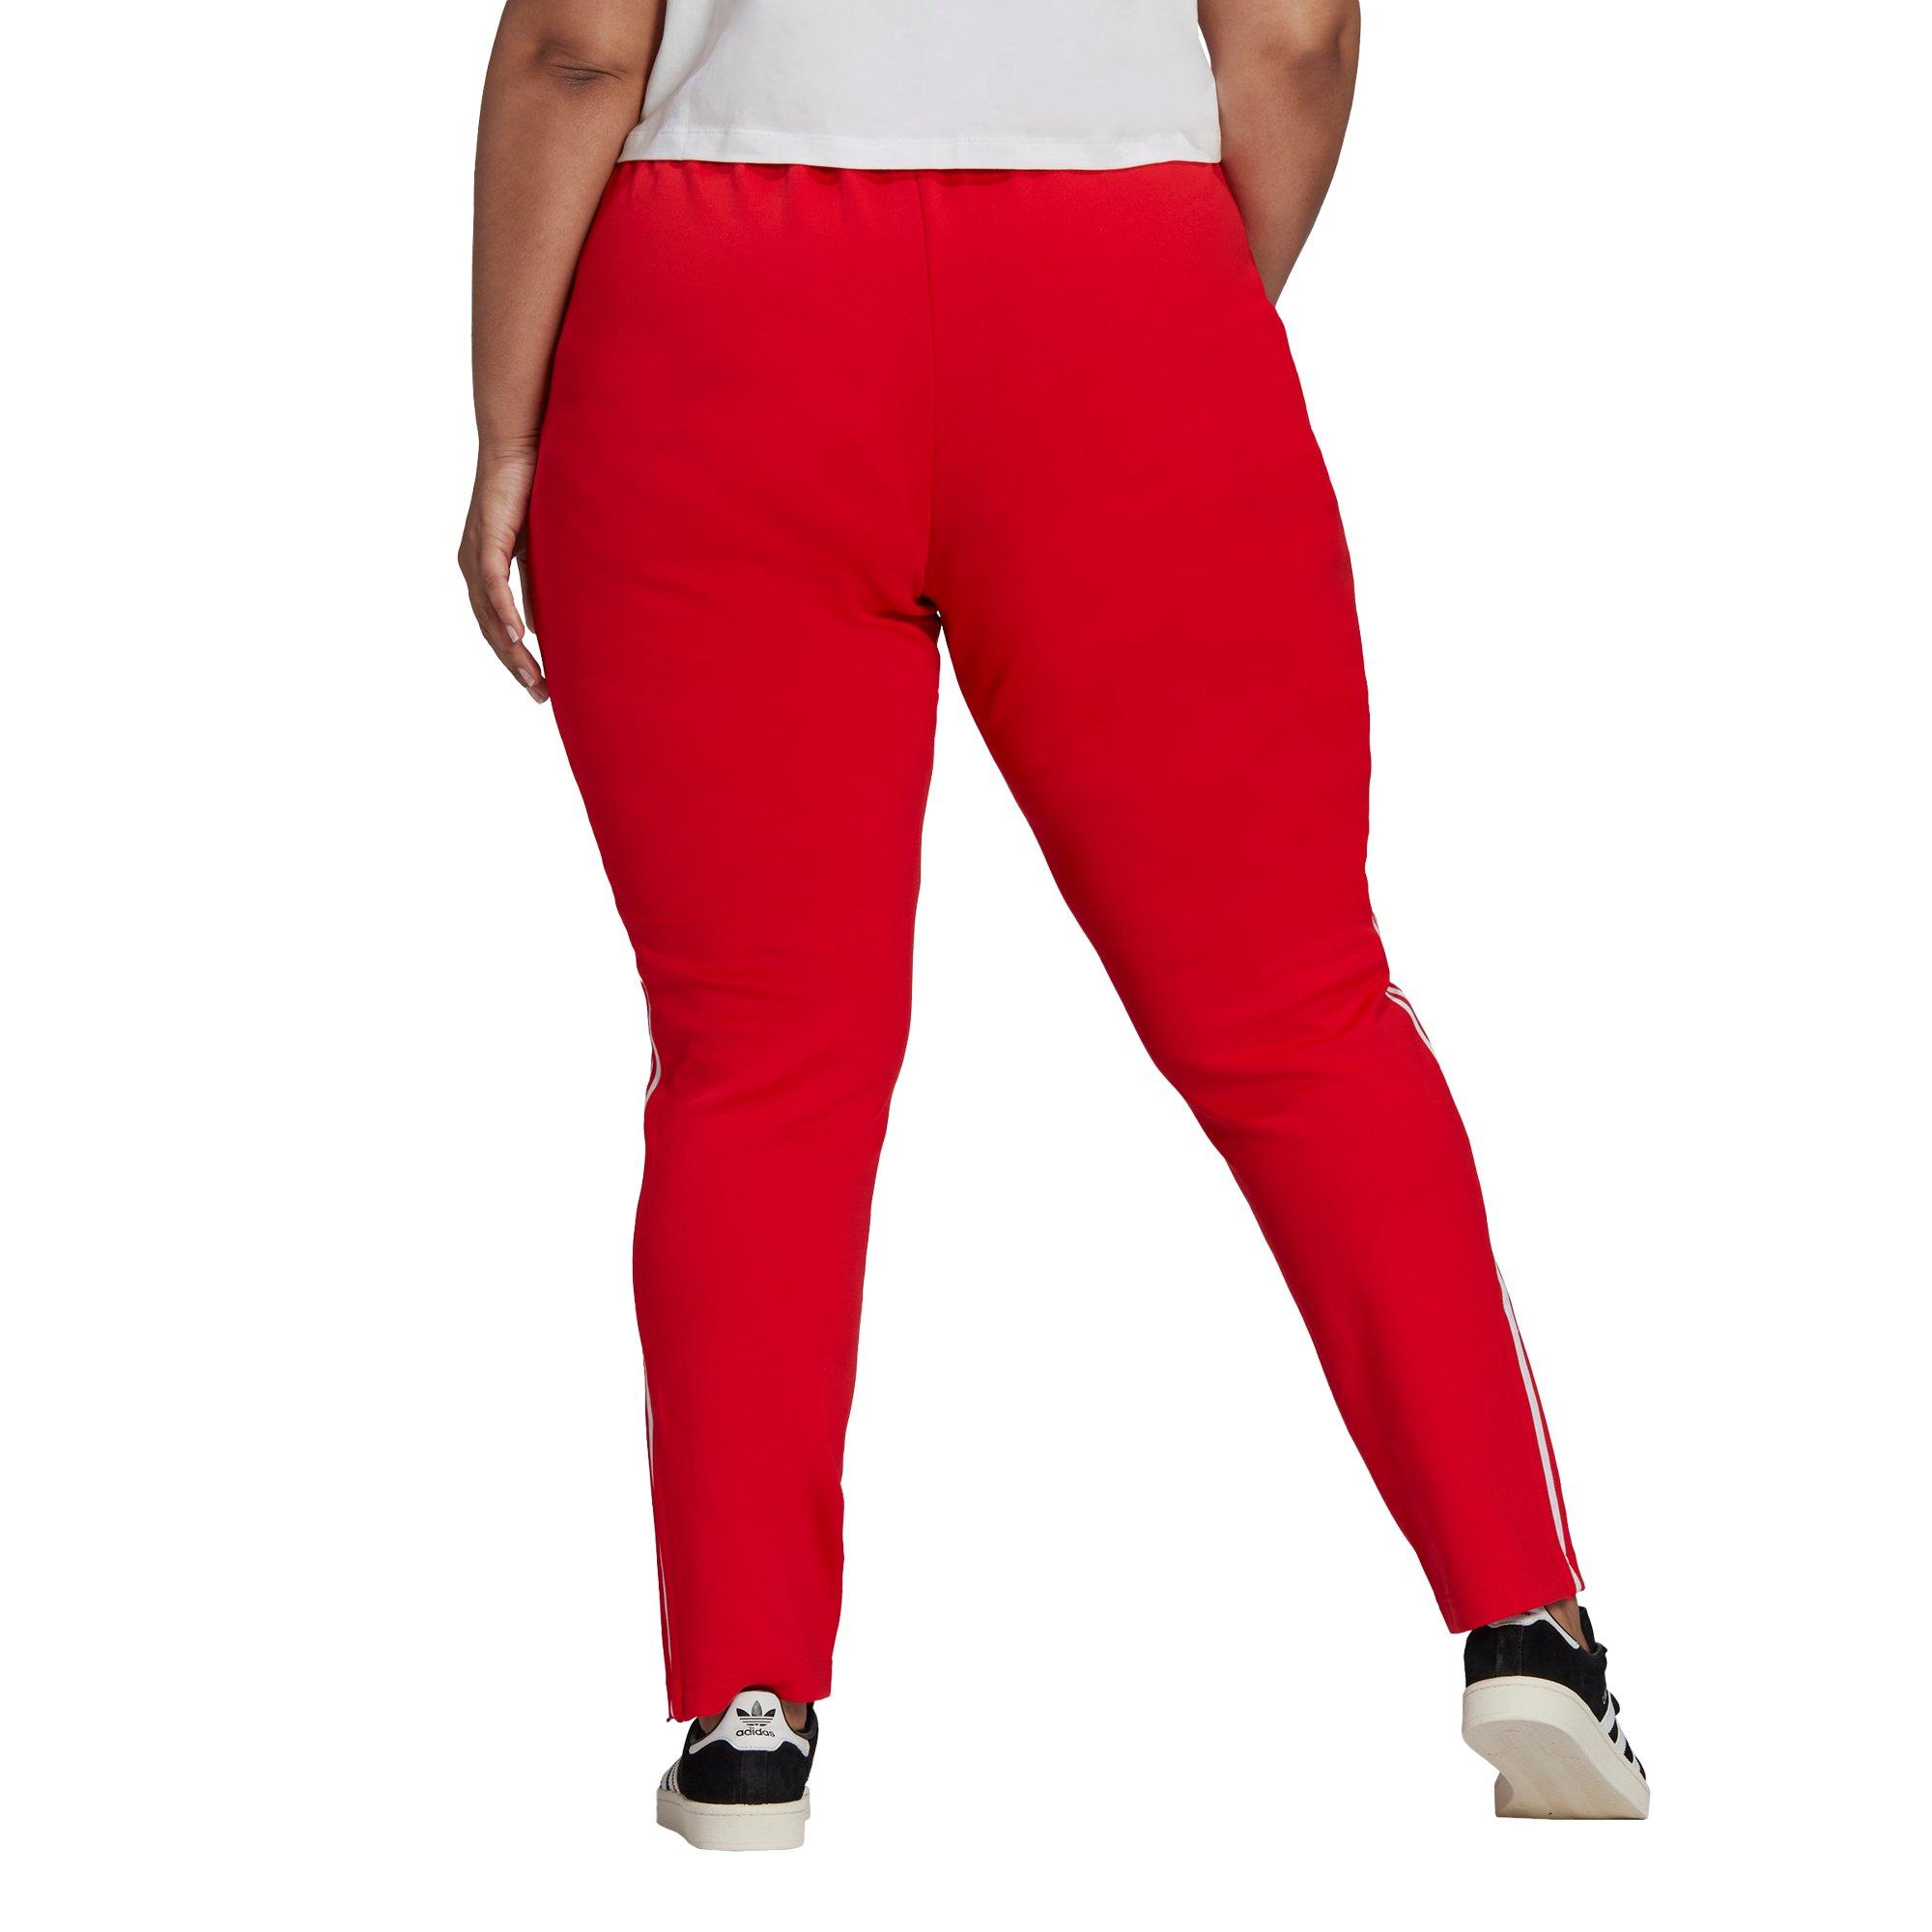 Buy Adidas Primeblue SST Tracksuit Bottoms Women vivid red from £31.49  (Today) – Best Deals on